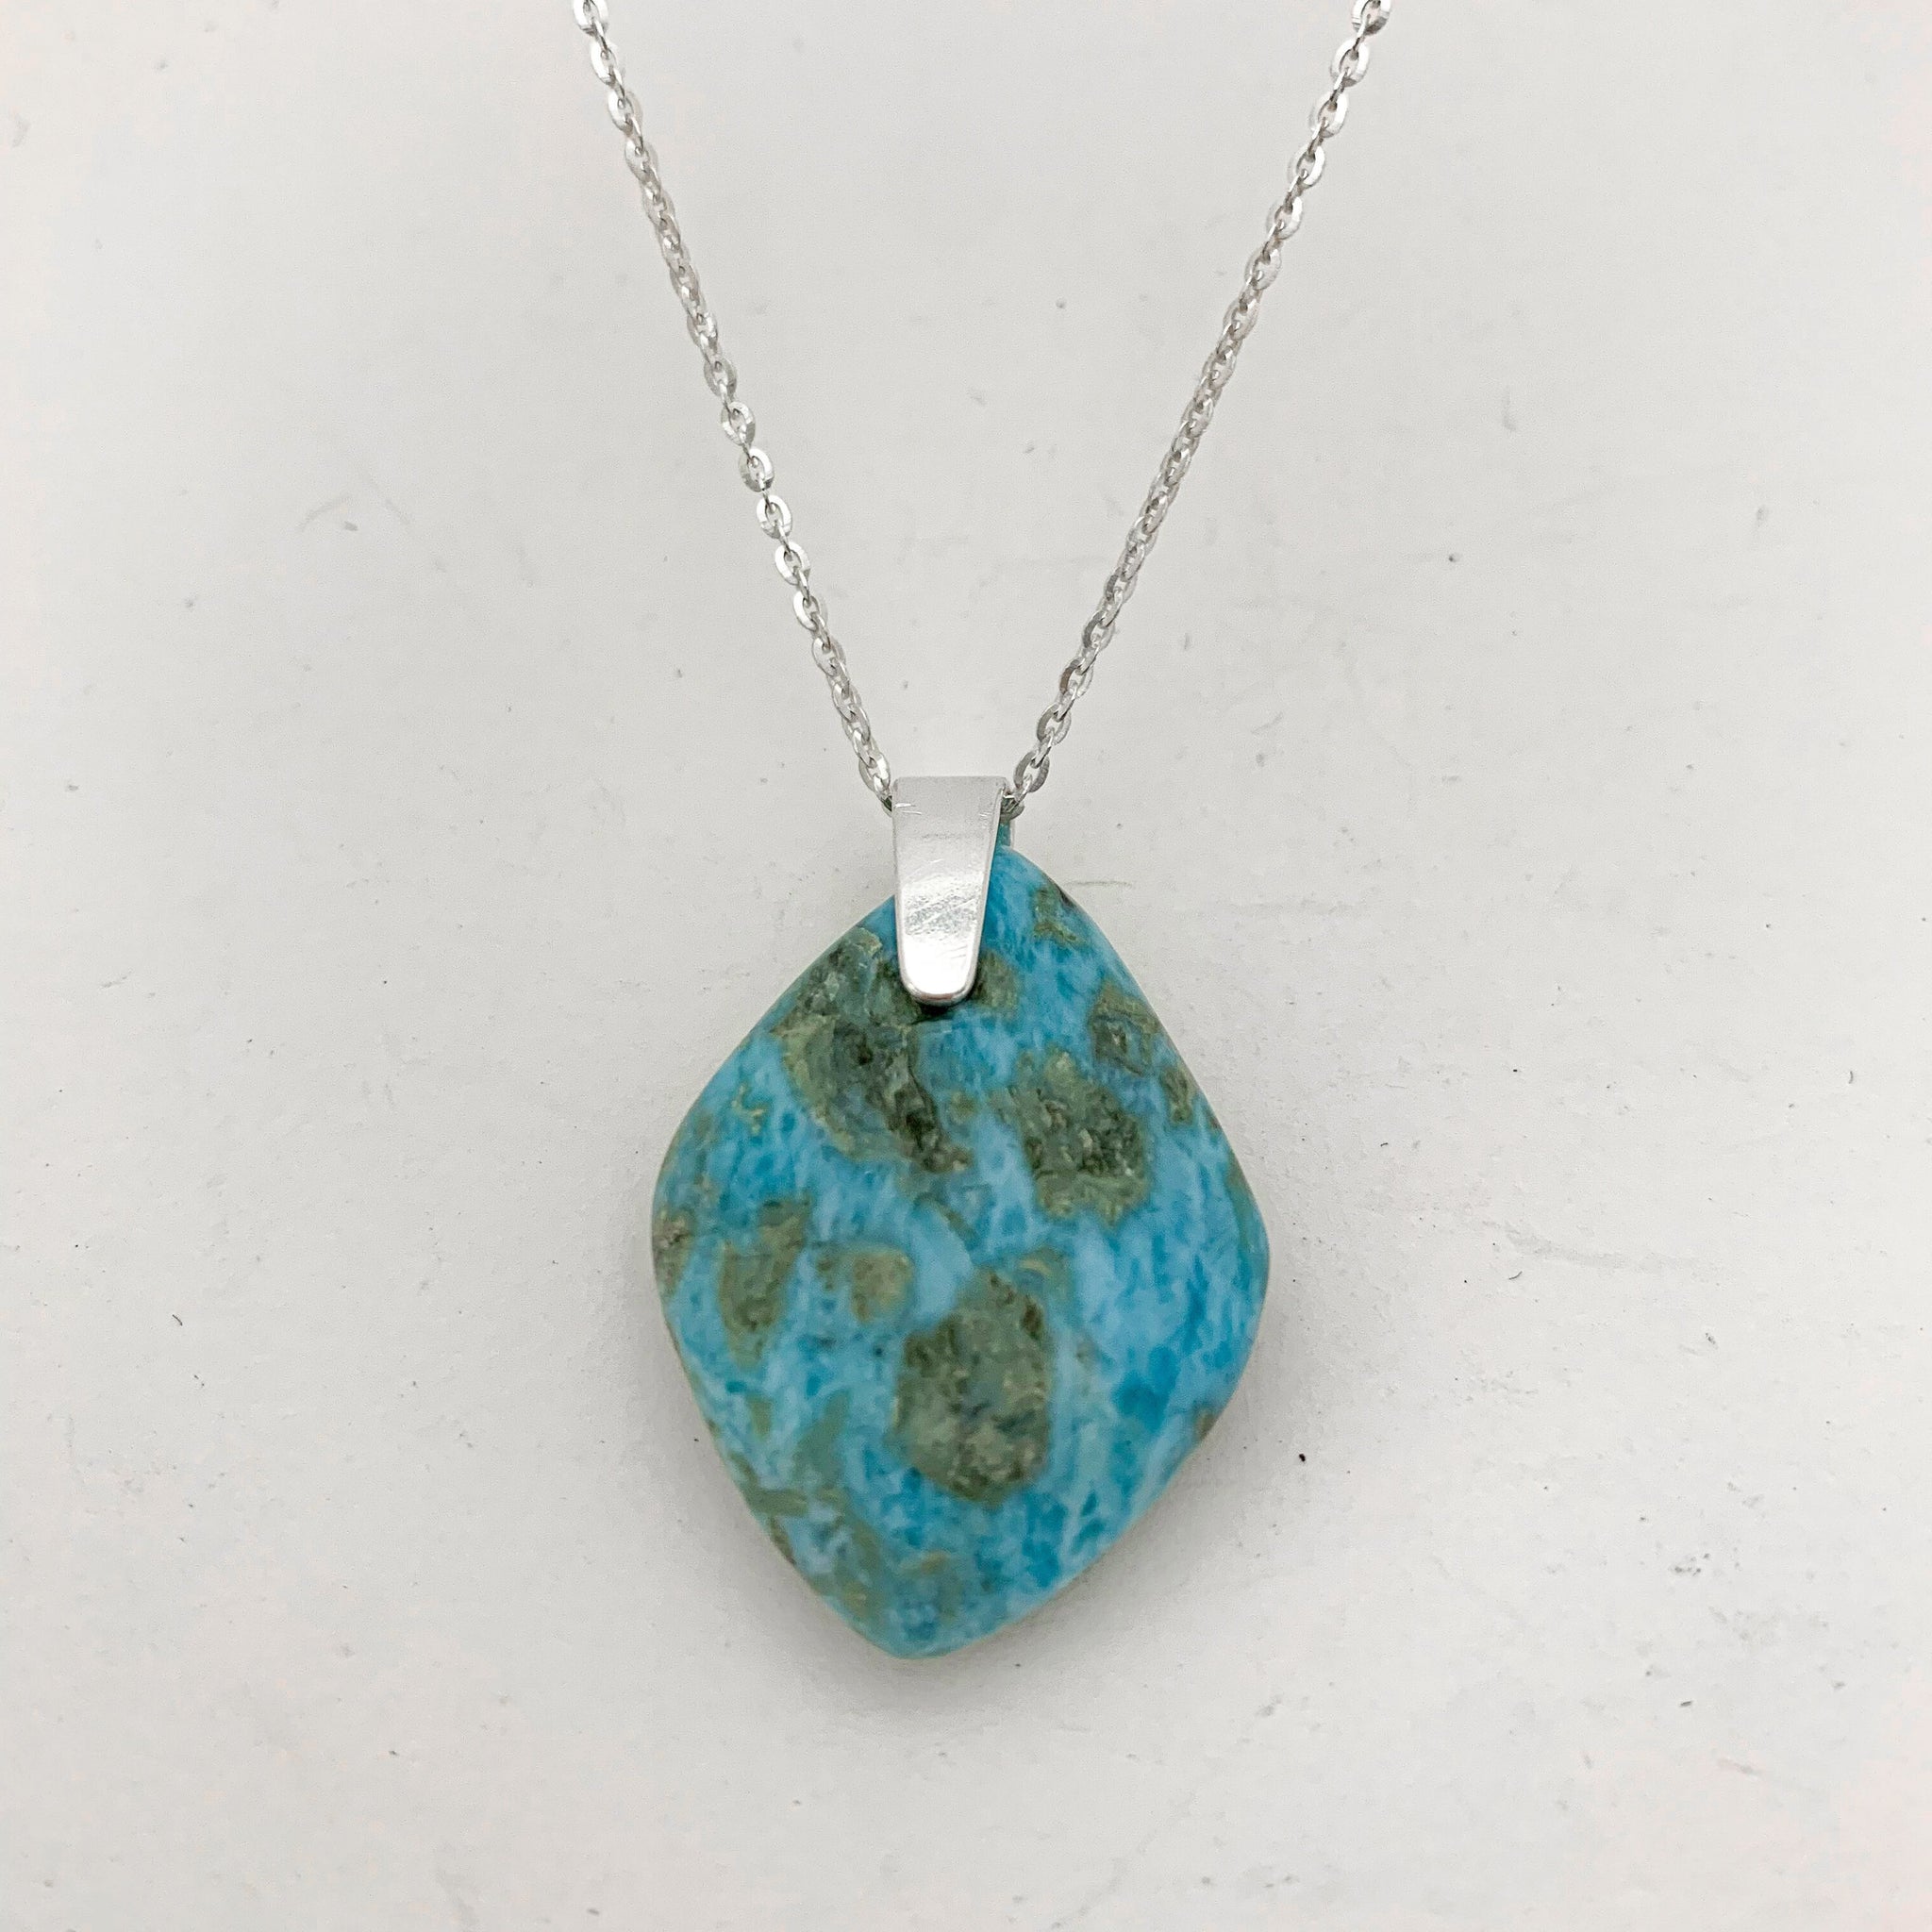 Trapezoid Larimar on simple sterling silver bail with sterling silver chain